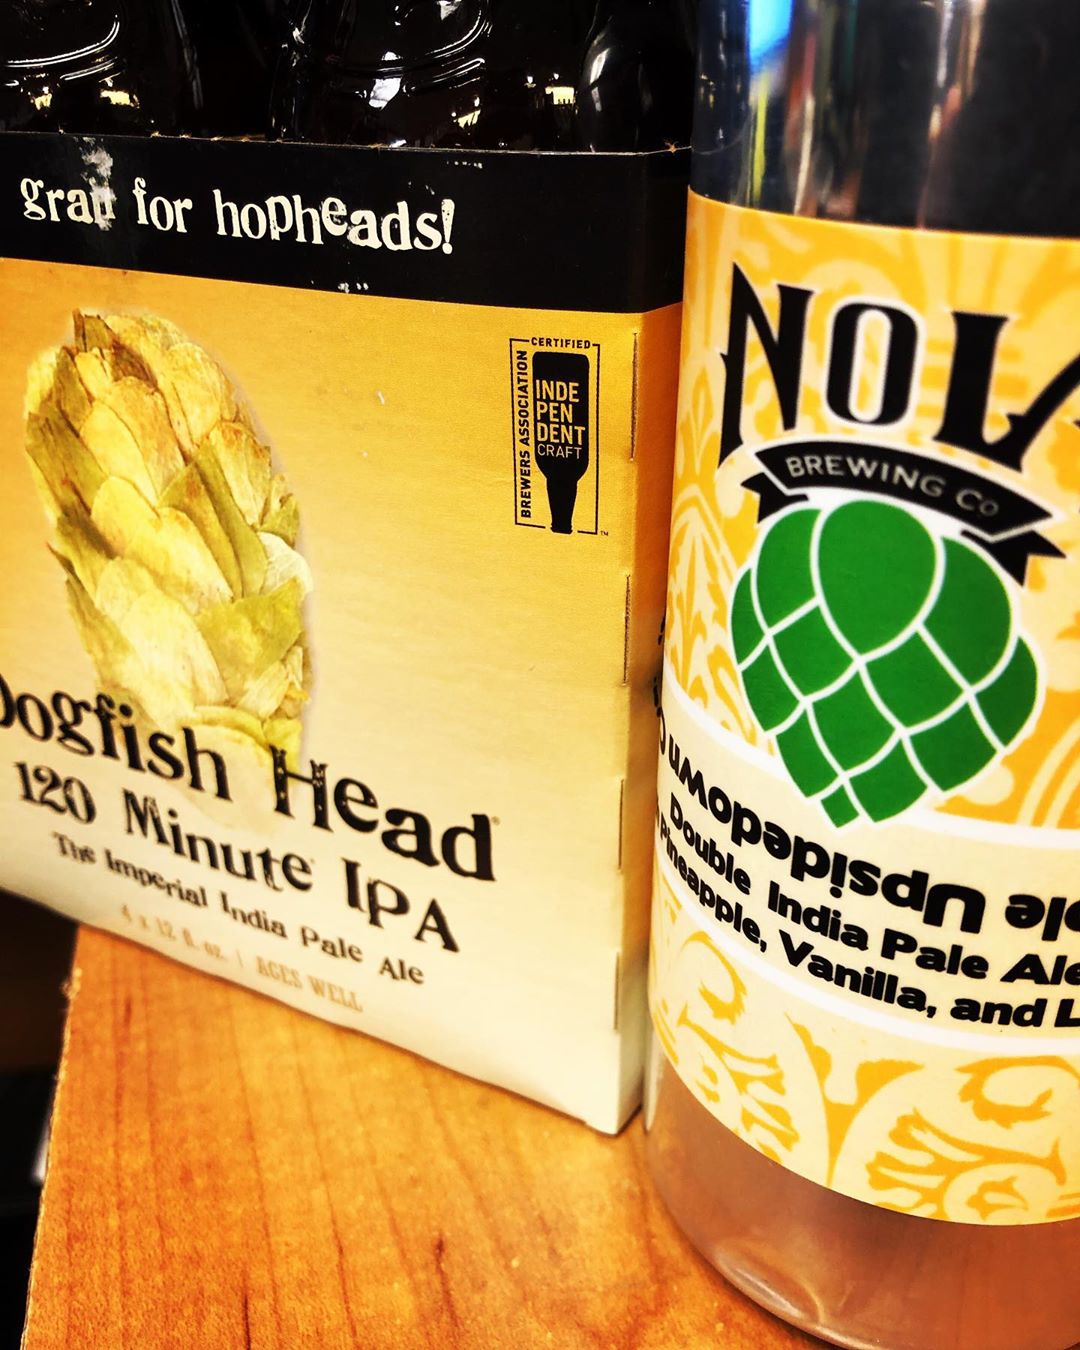 New brews now in stock at our Perkins Rd location! @nolabrewing @dogfishhead #beer #drinklocal #upsidedown